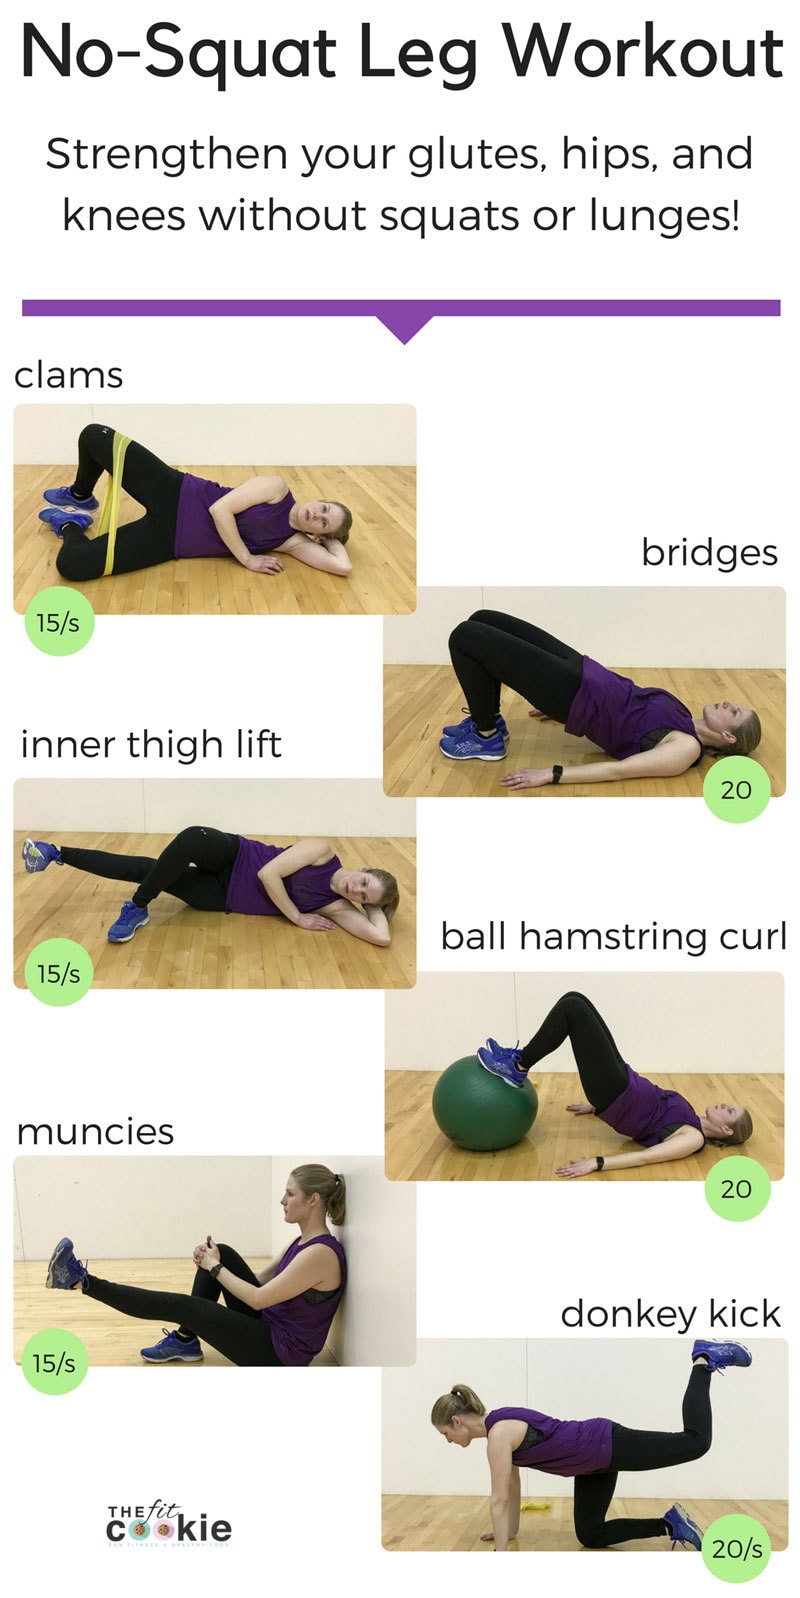 Have trouble doing squats, or need to avoid them due to knee trouble or injuries? This No Squat Leg Workout is knee-friendly and great for strengthening your hips and glutes without stressing your knees - @TheFitCookie #workout #fitness #AD @AvieNaturals